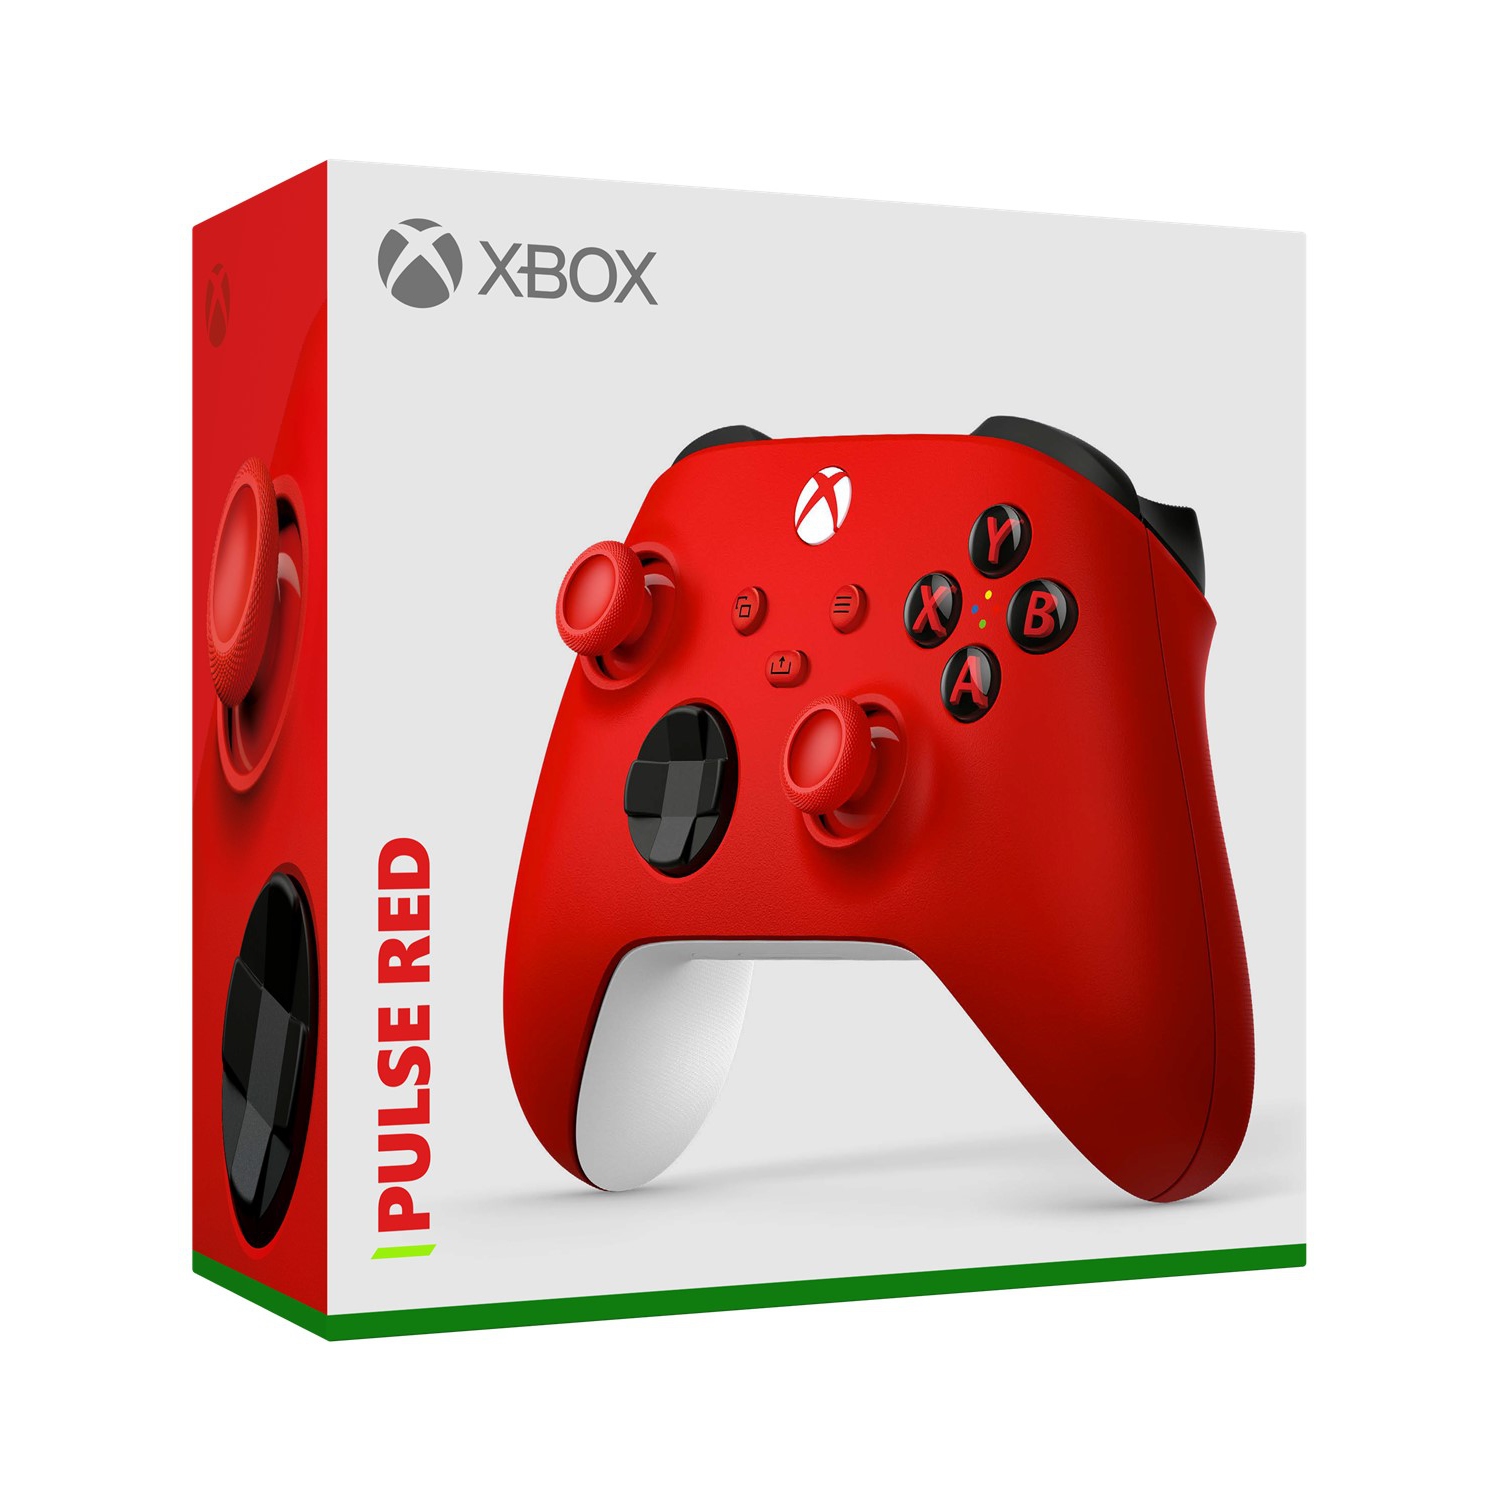 Xbox Wireless Controller - Pulse Red - Grade A refurbished